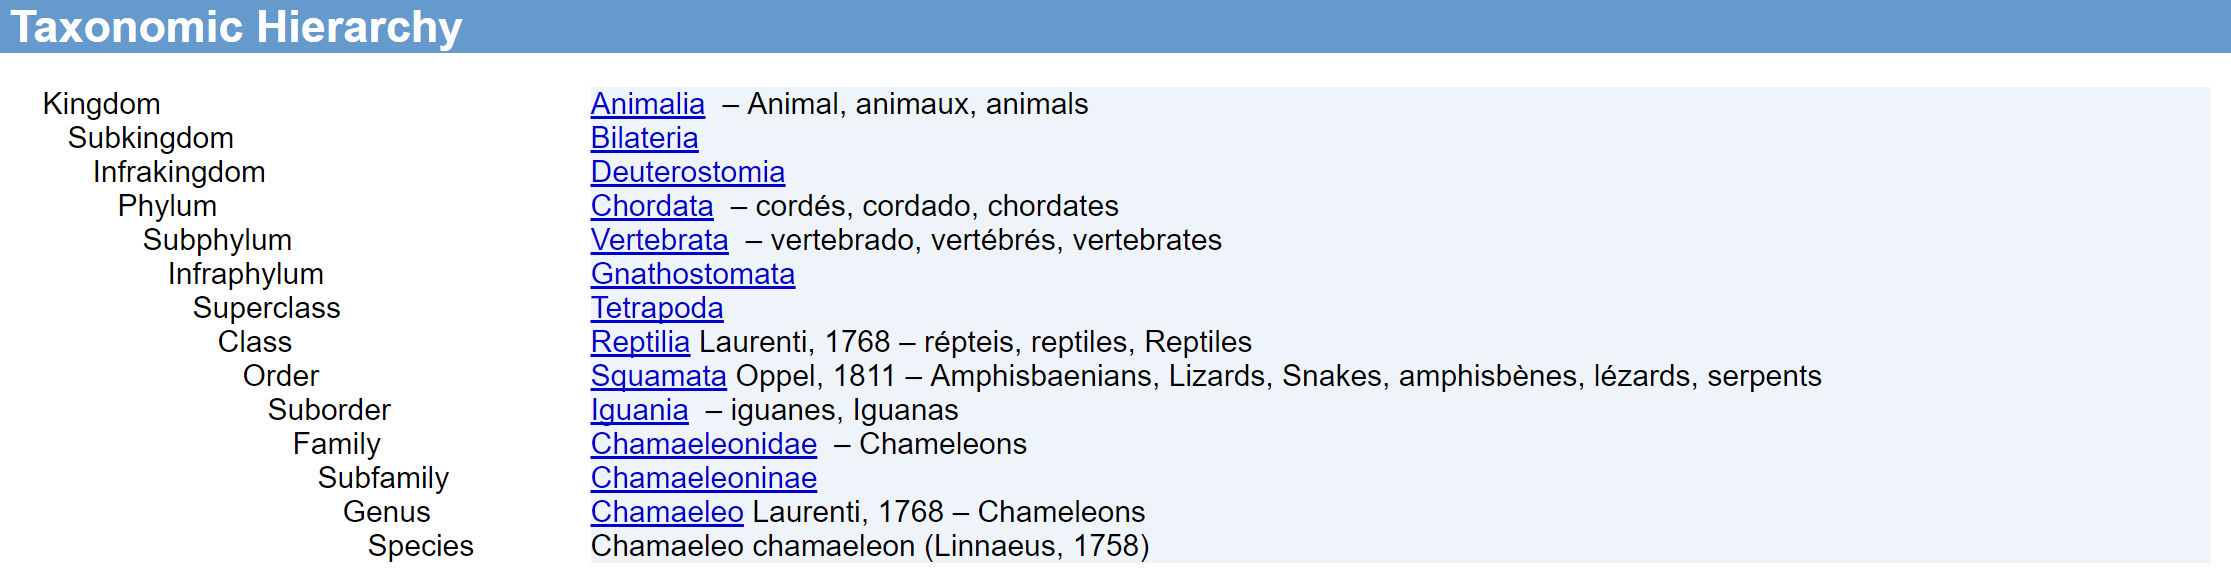 species page classification.PNG